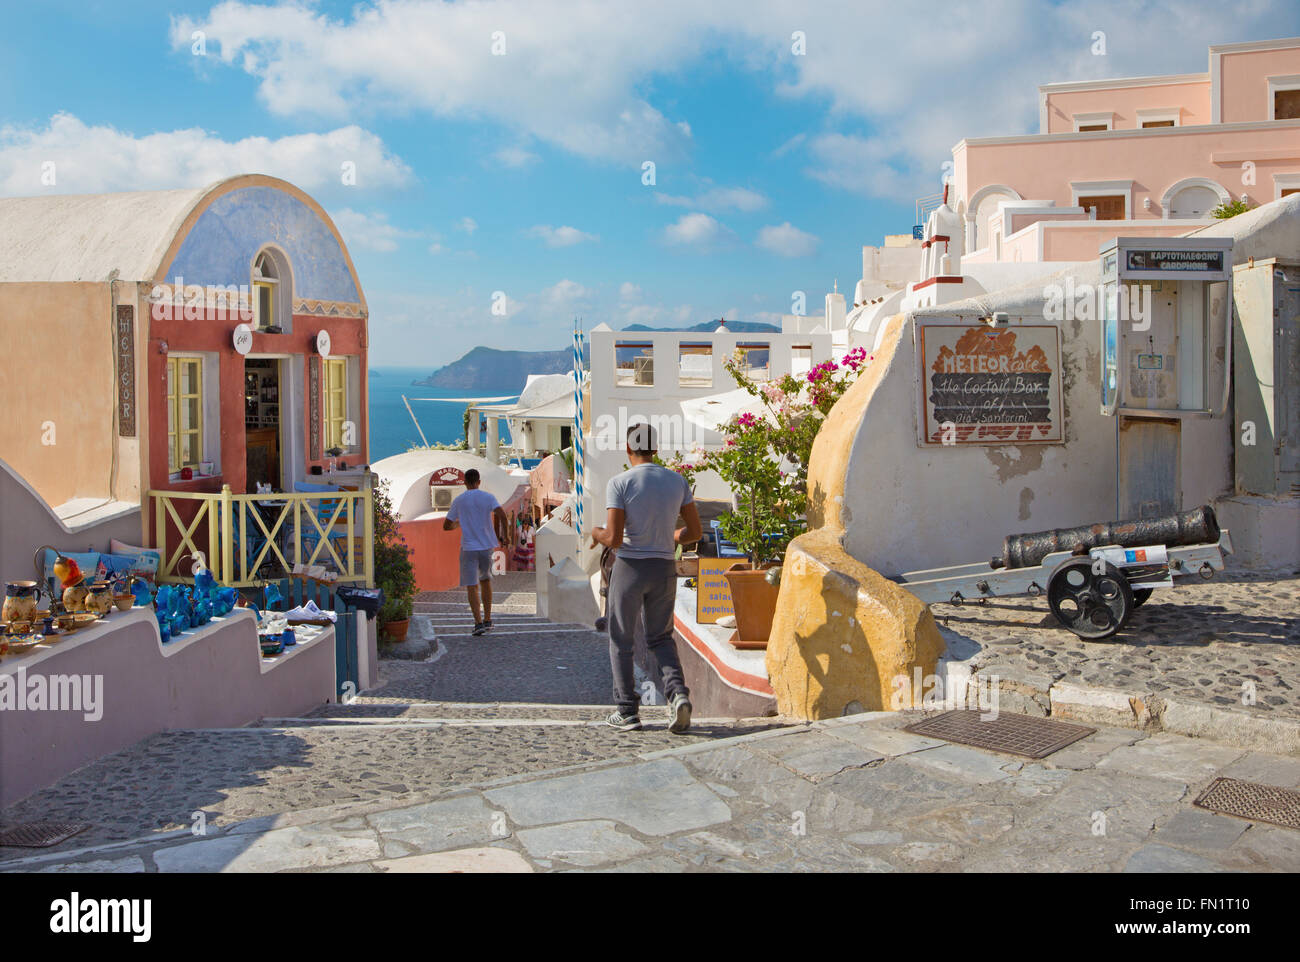 SANTORINI, GREECE - OCTOBER 5, 2015: The street of Oia with the souvenirs shops and restaurants. Stock Photo